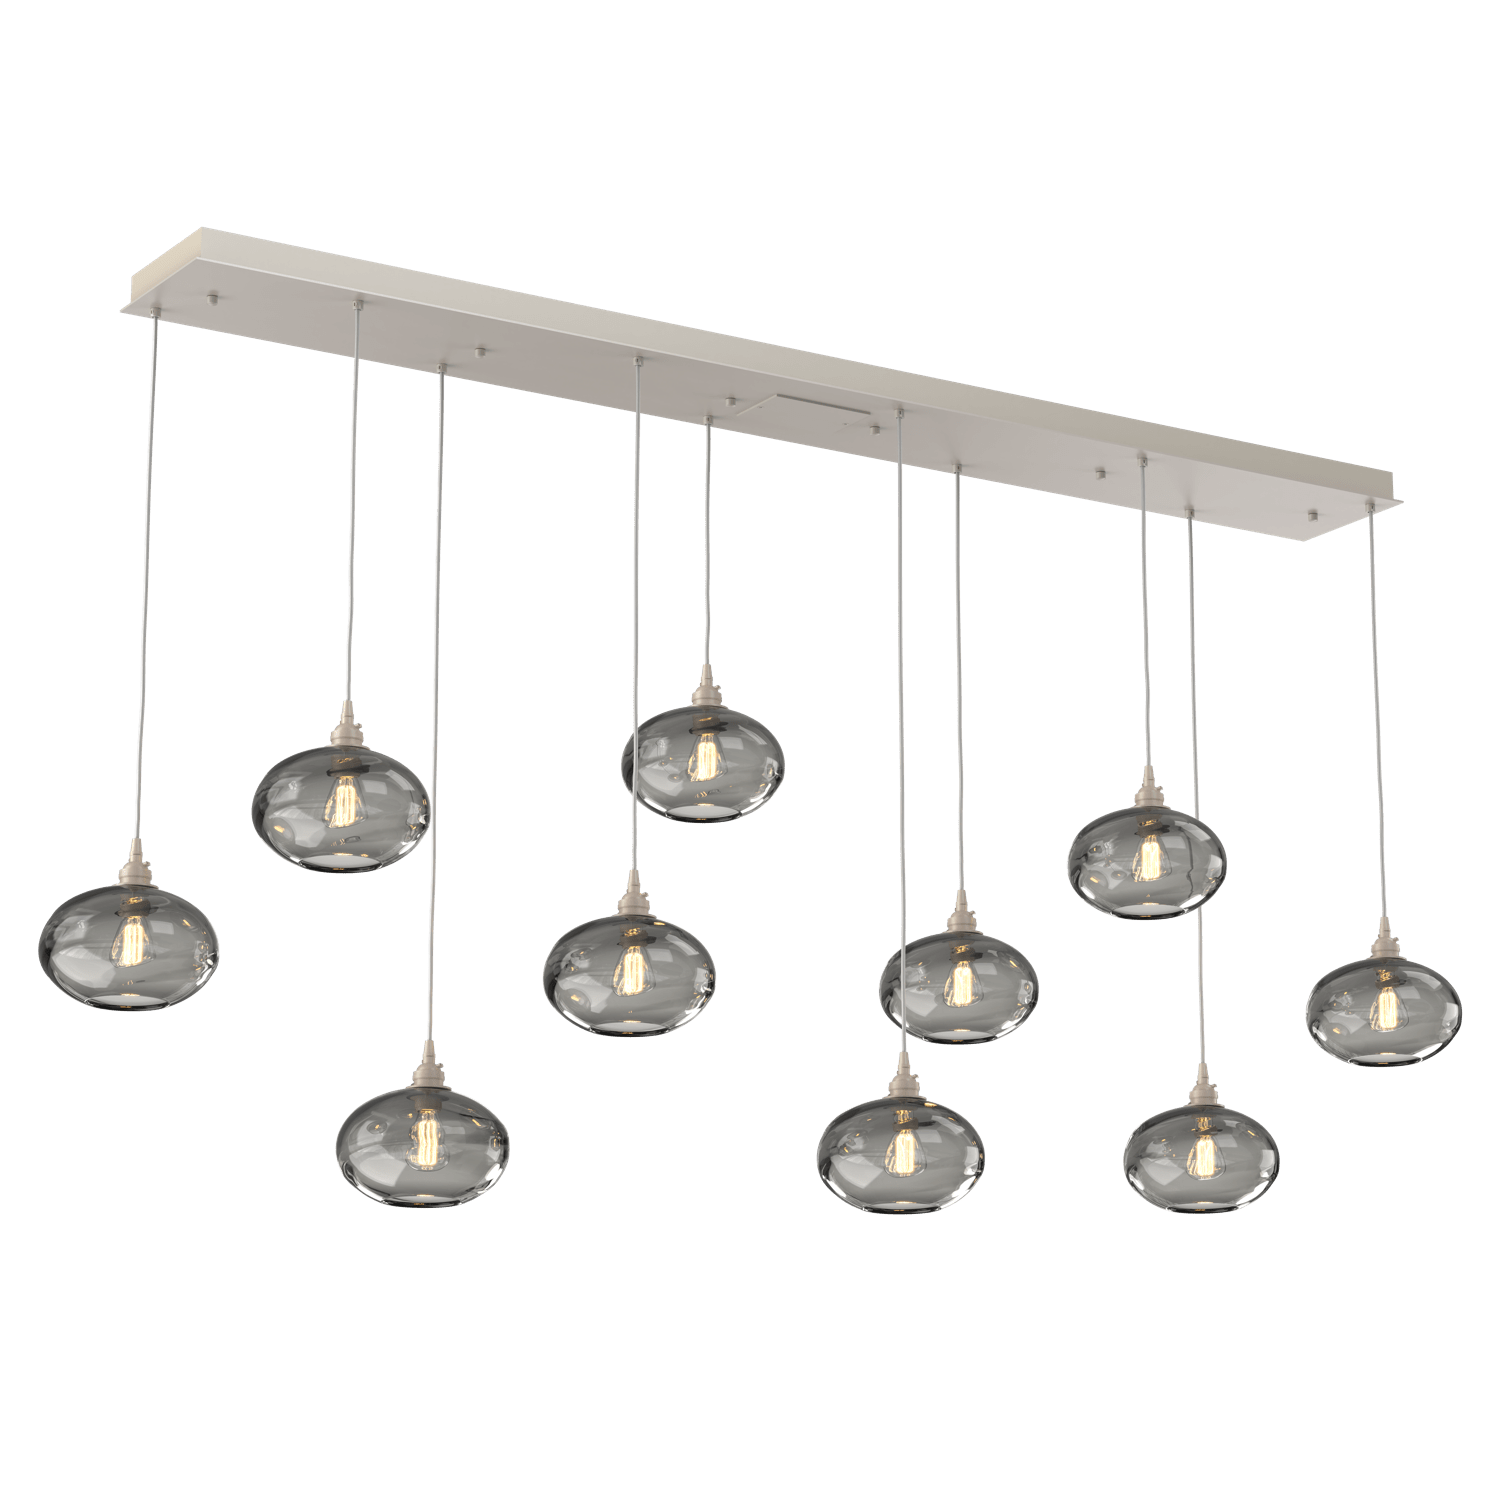 PLB0036-10-BS-OS-Hammerton-Studio-Optic-Blown-Glass-Coppa-10-light-linear-pendant-chandelier-with-metallic-beige-silver-finish-and-optic-smoke-blown-glass-shades-and-incandescent-lamping